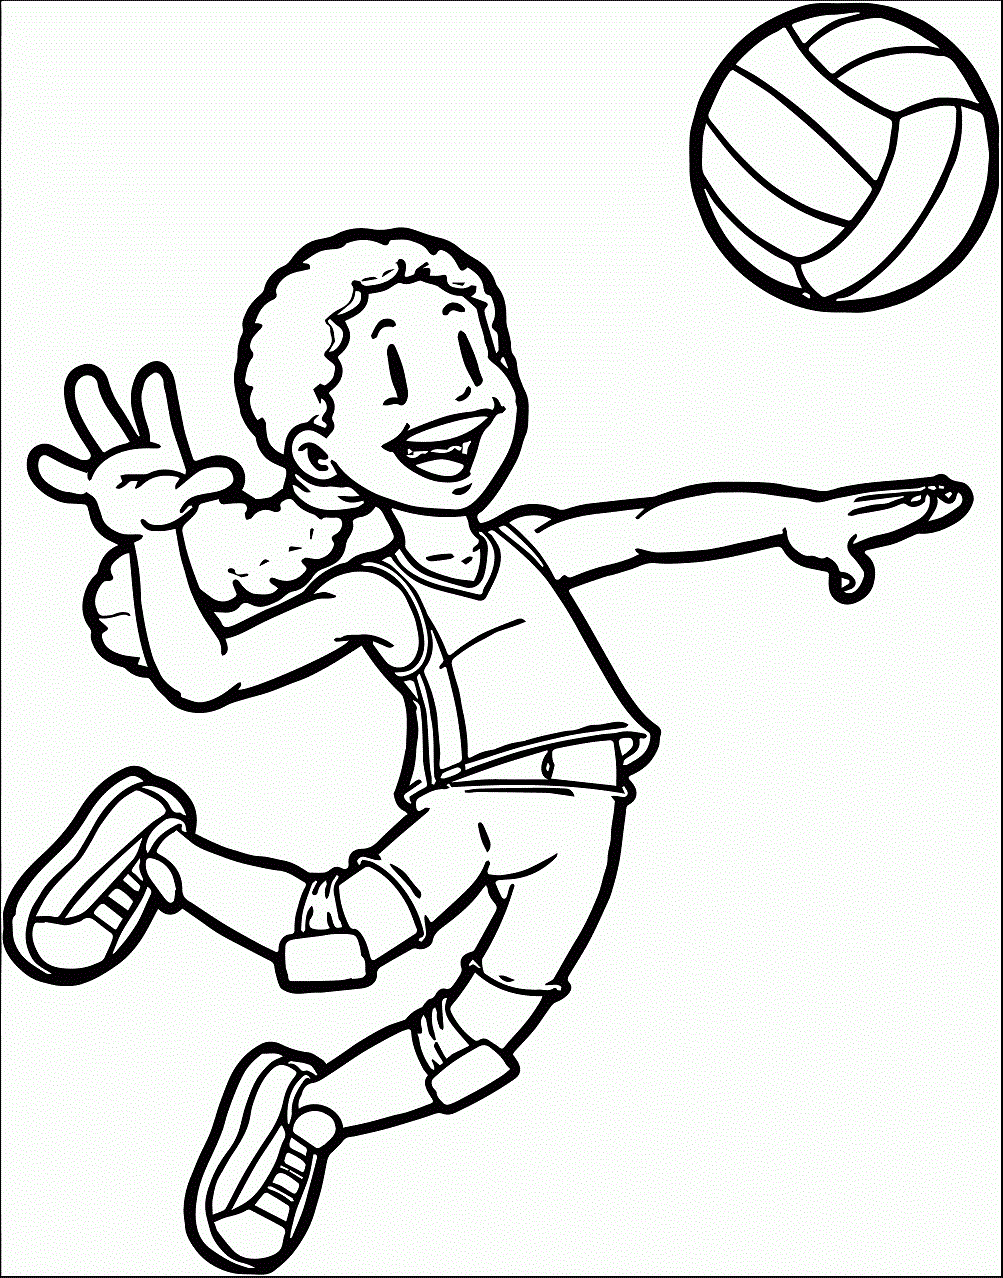 A Volleyball Player Coloring Page Free Printable Coloring Pages for Kids